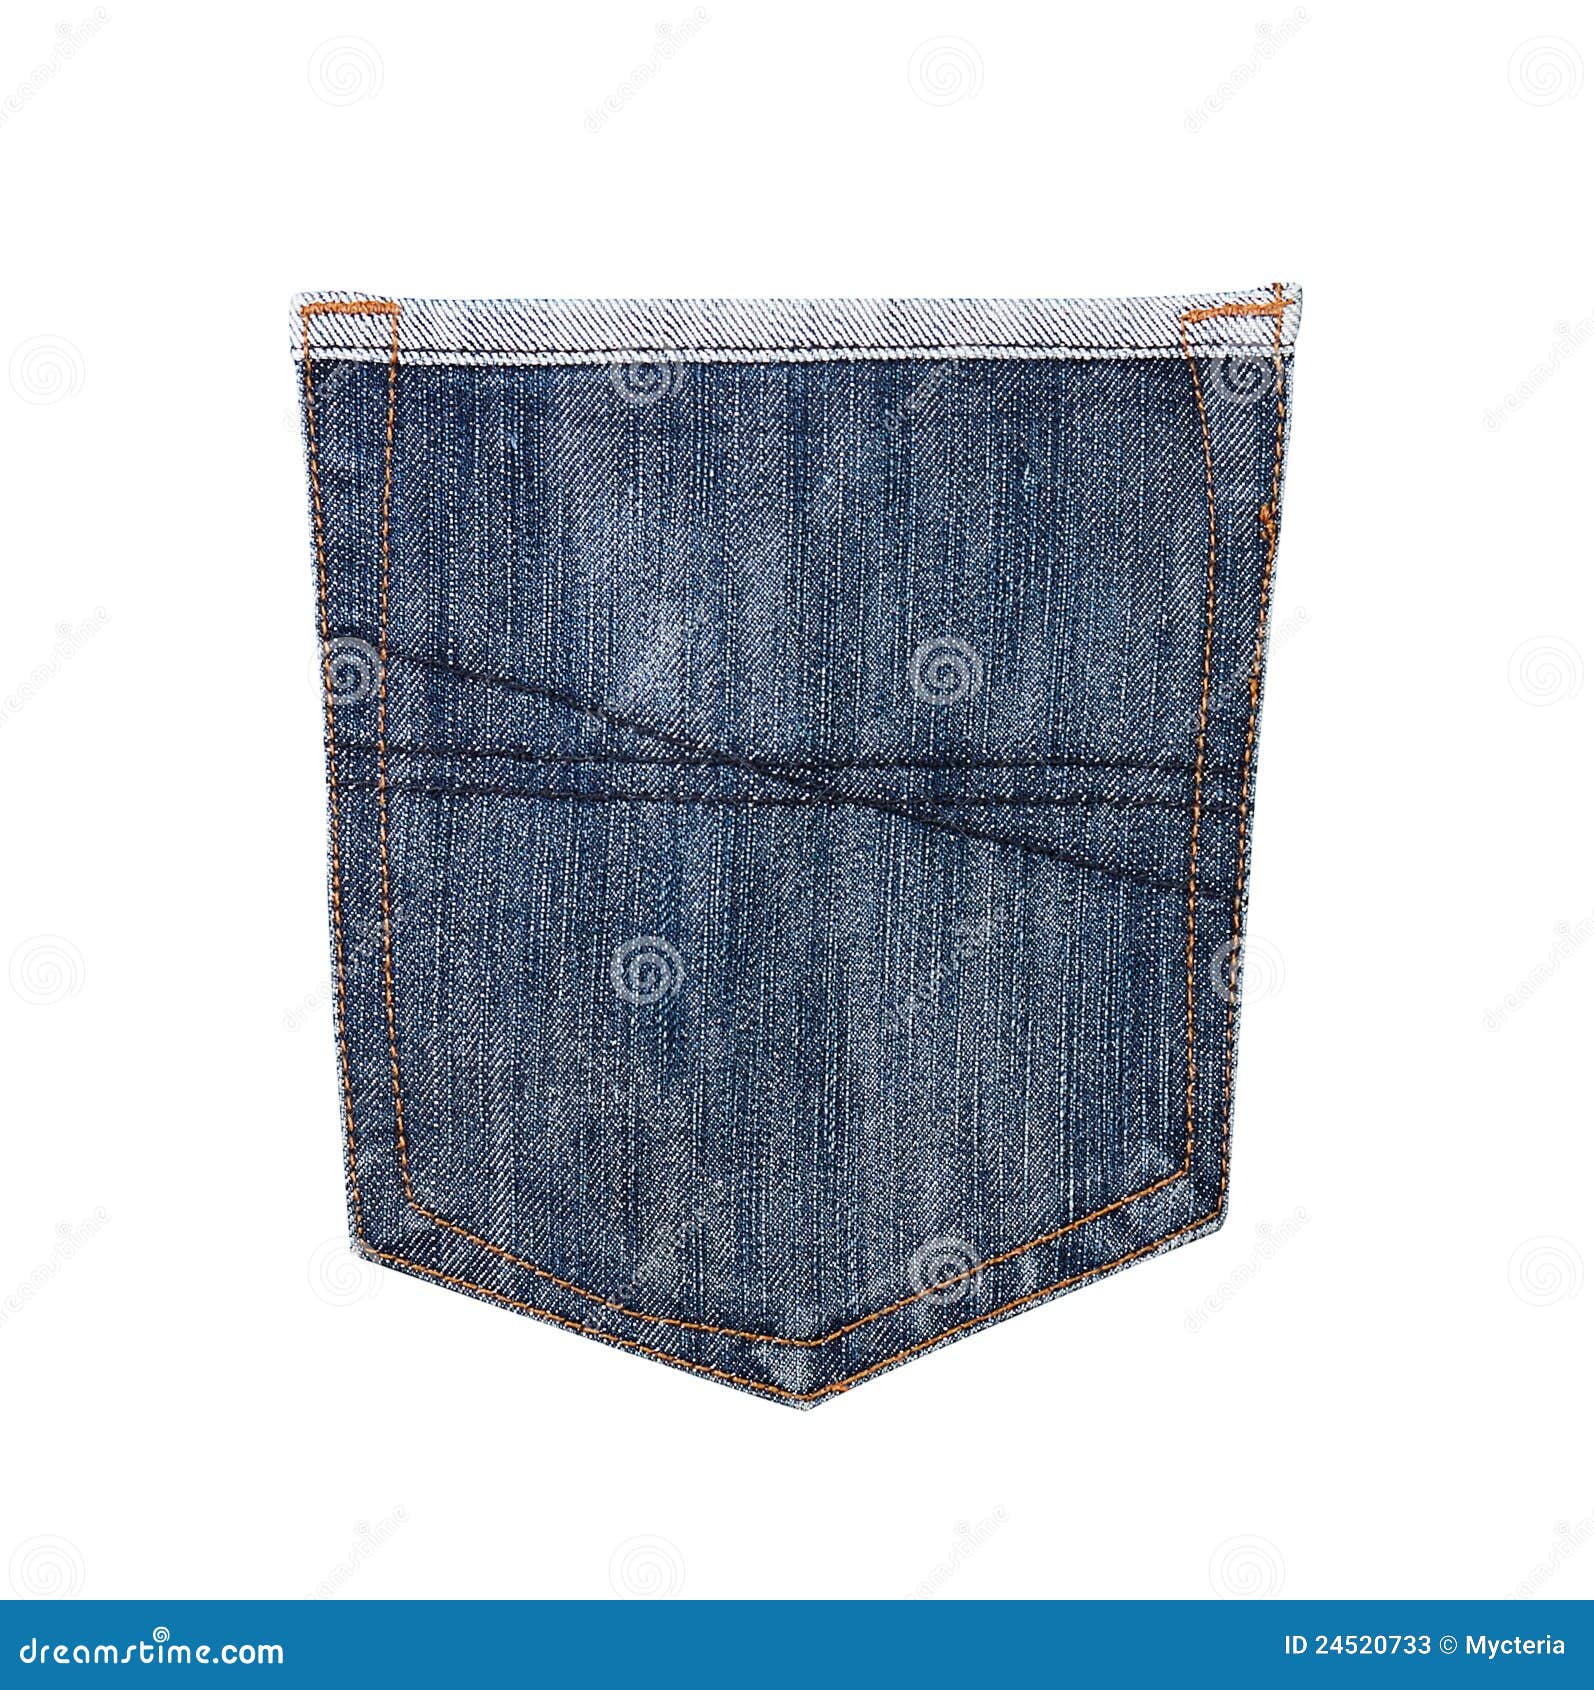 Hip-pocket of jeans stock image. Image of clothes, garment - 24520733